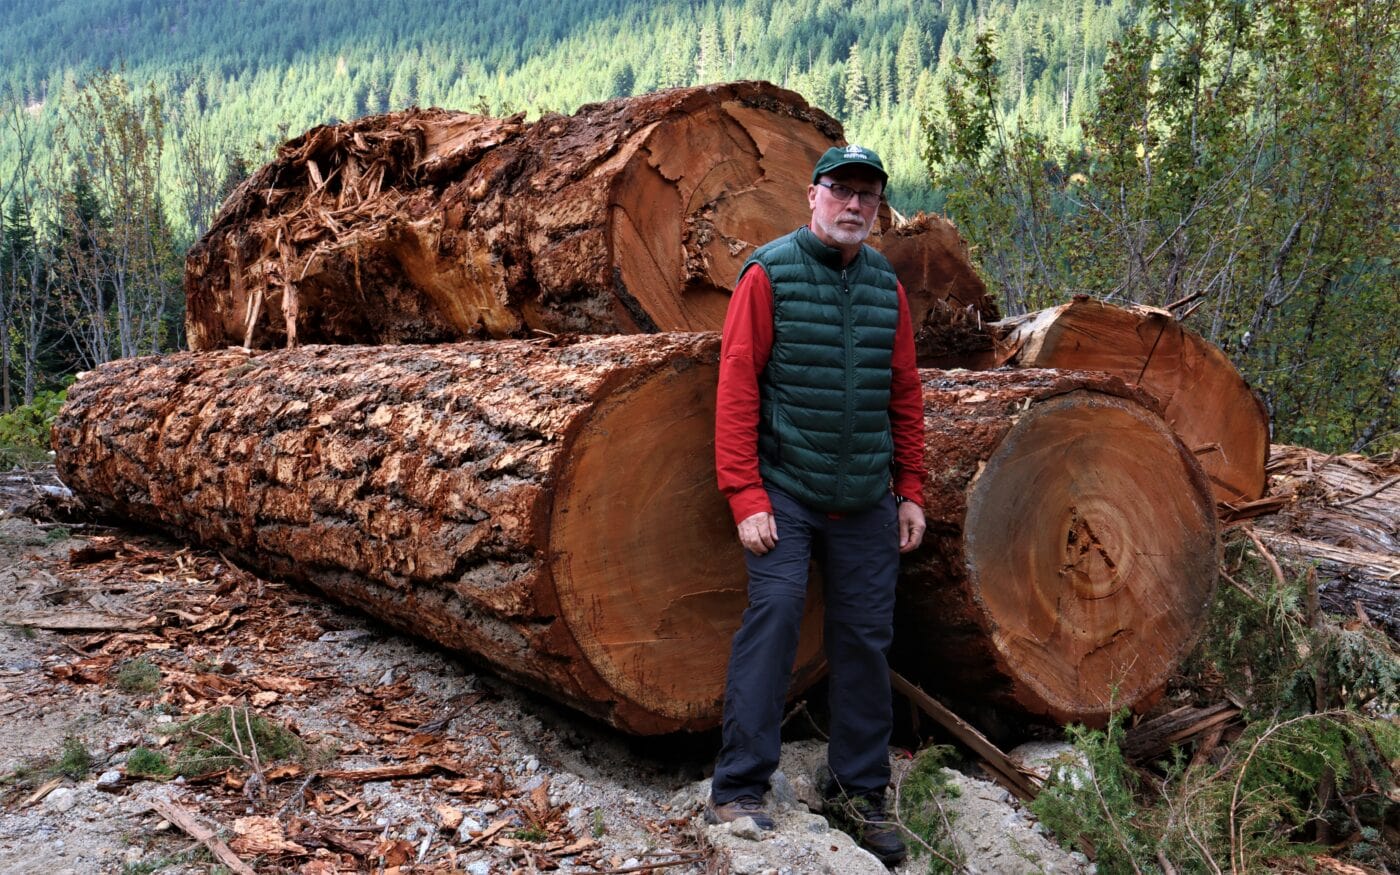 Joe Foy from the Wilderness Committee stands beside felled old-growth trees in the Spuzzum Valley, where B.C. government biologists discovered Canada’s last breeding pair of spotted owls in 2019. Wilderness Committee only found out about the owls in 2020. Photo: Wilderness Committee